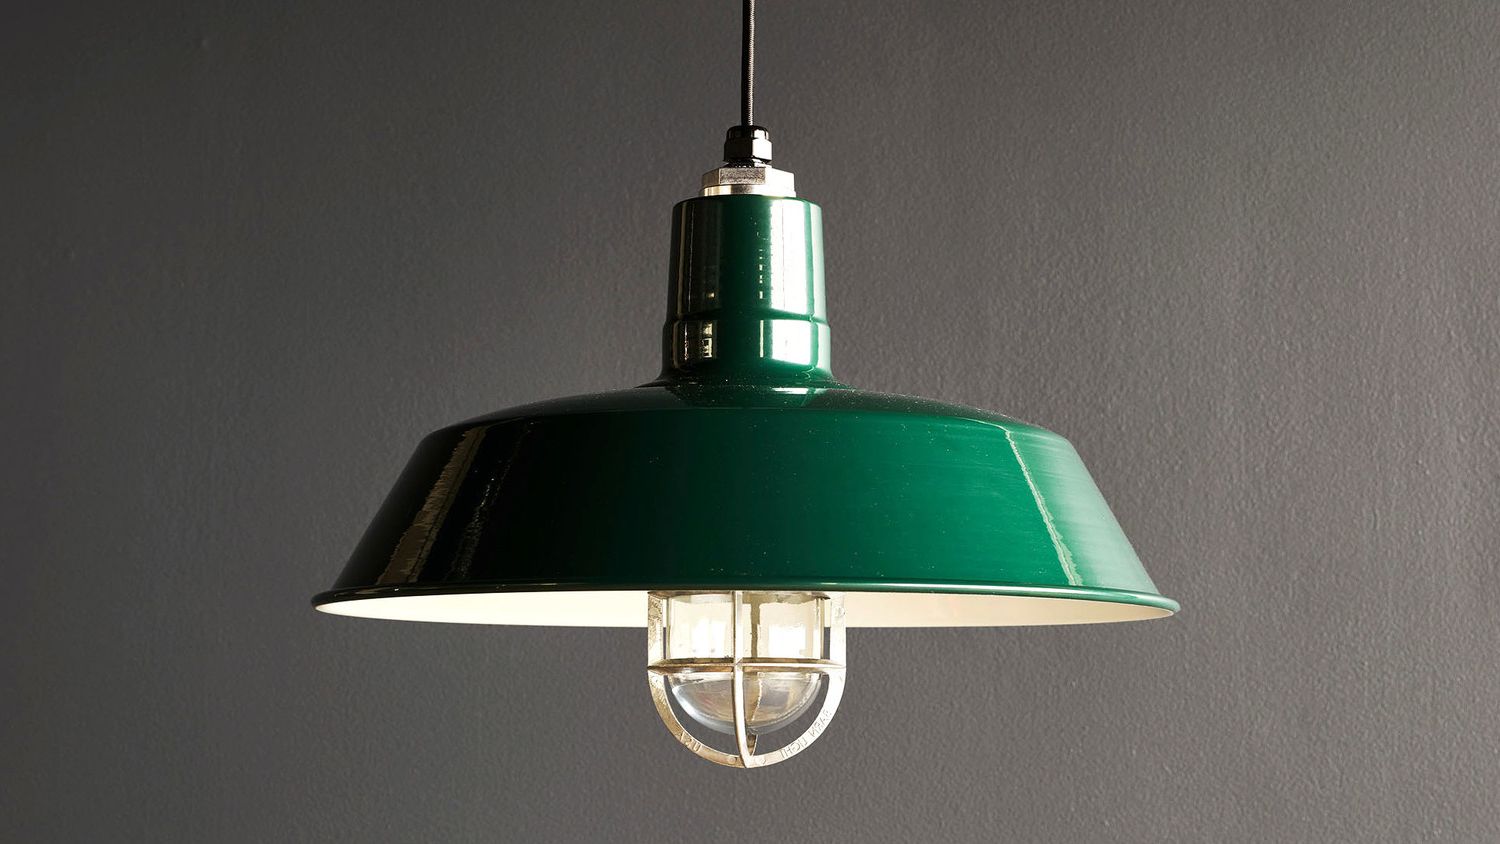 Hot Sale: Nadine 1 Light Schoolhouse Pendant Laurel Foundry With Regard To Well Known Nadine 1 Light Single Schoolhouse Pendants (View 25 of 25)